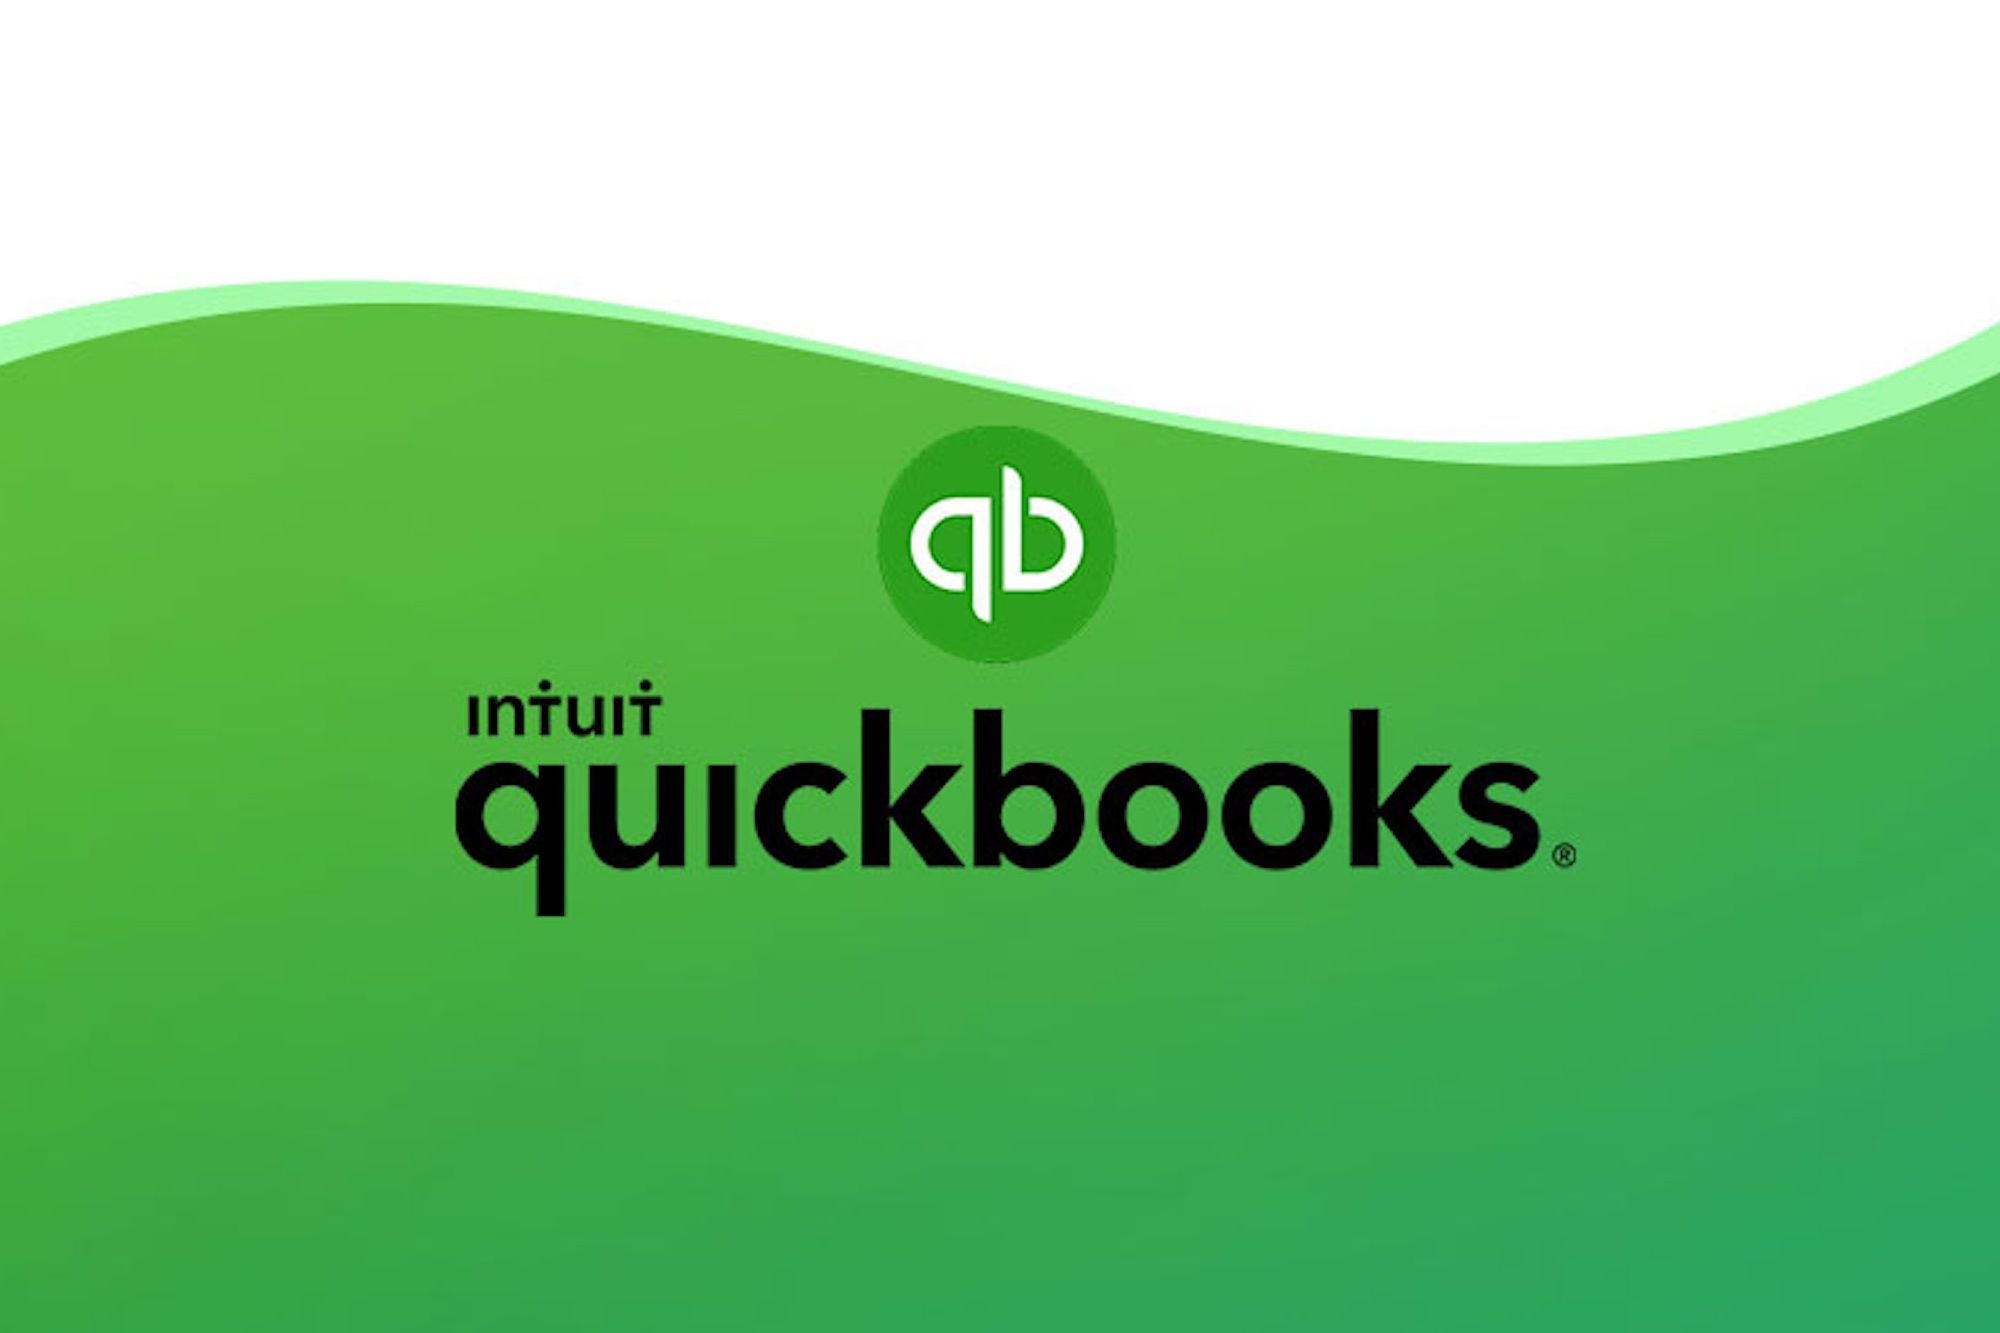 QuickBooks Desktop to stop selling to new U.S. subscribers